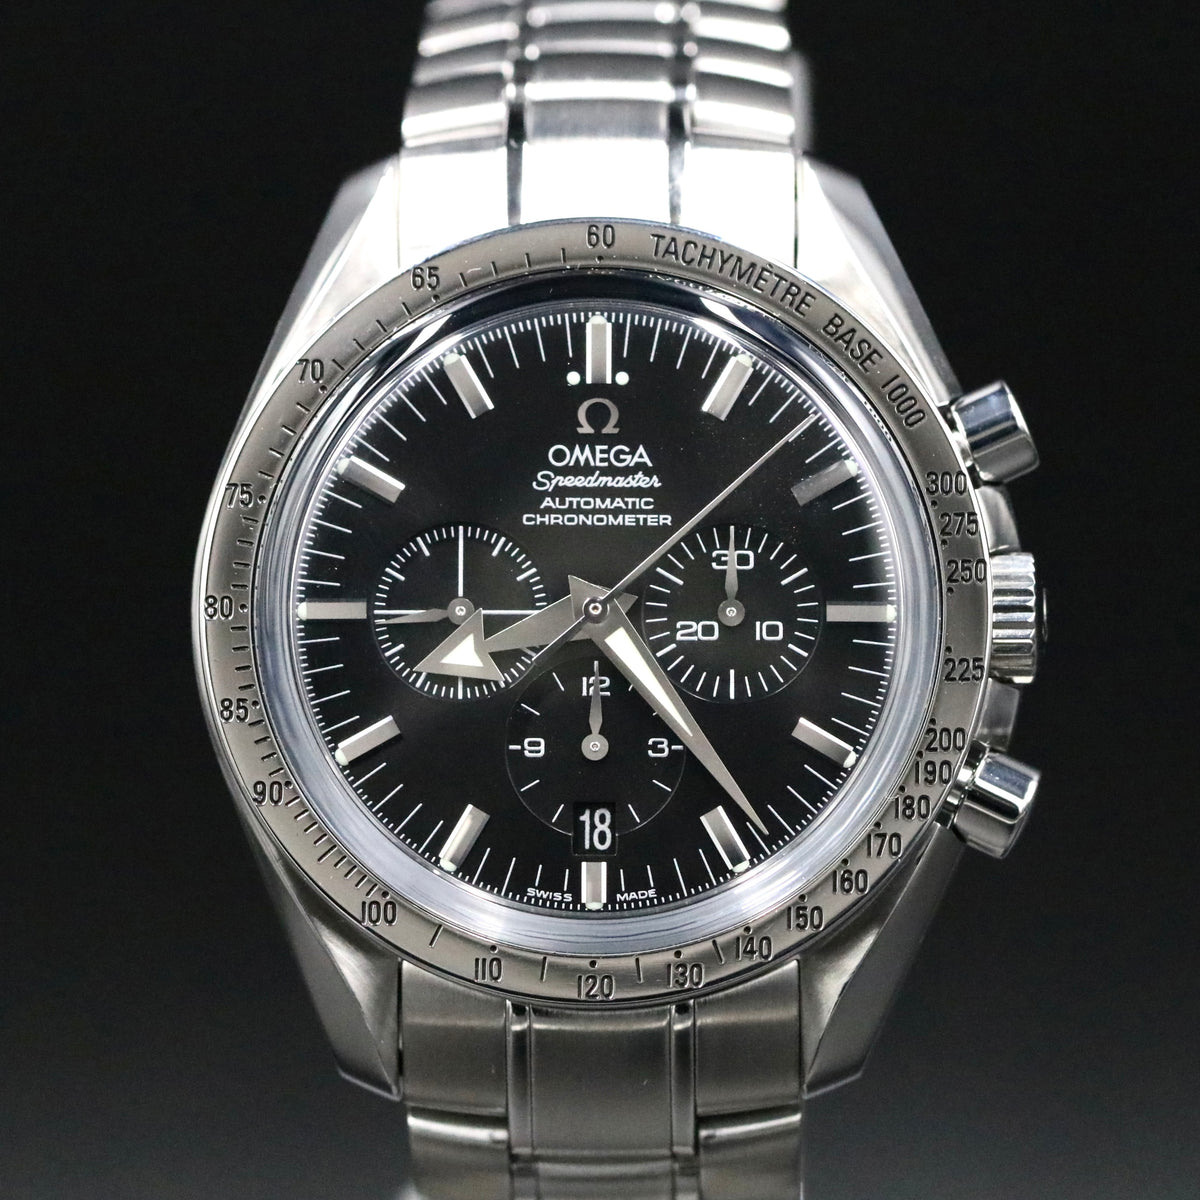 Omega 3551.50 Speedmaster Broad Arrow with Papers